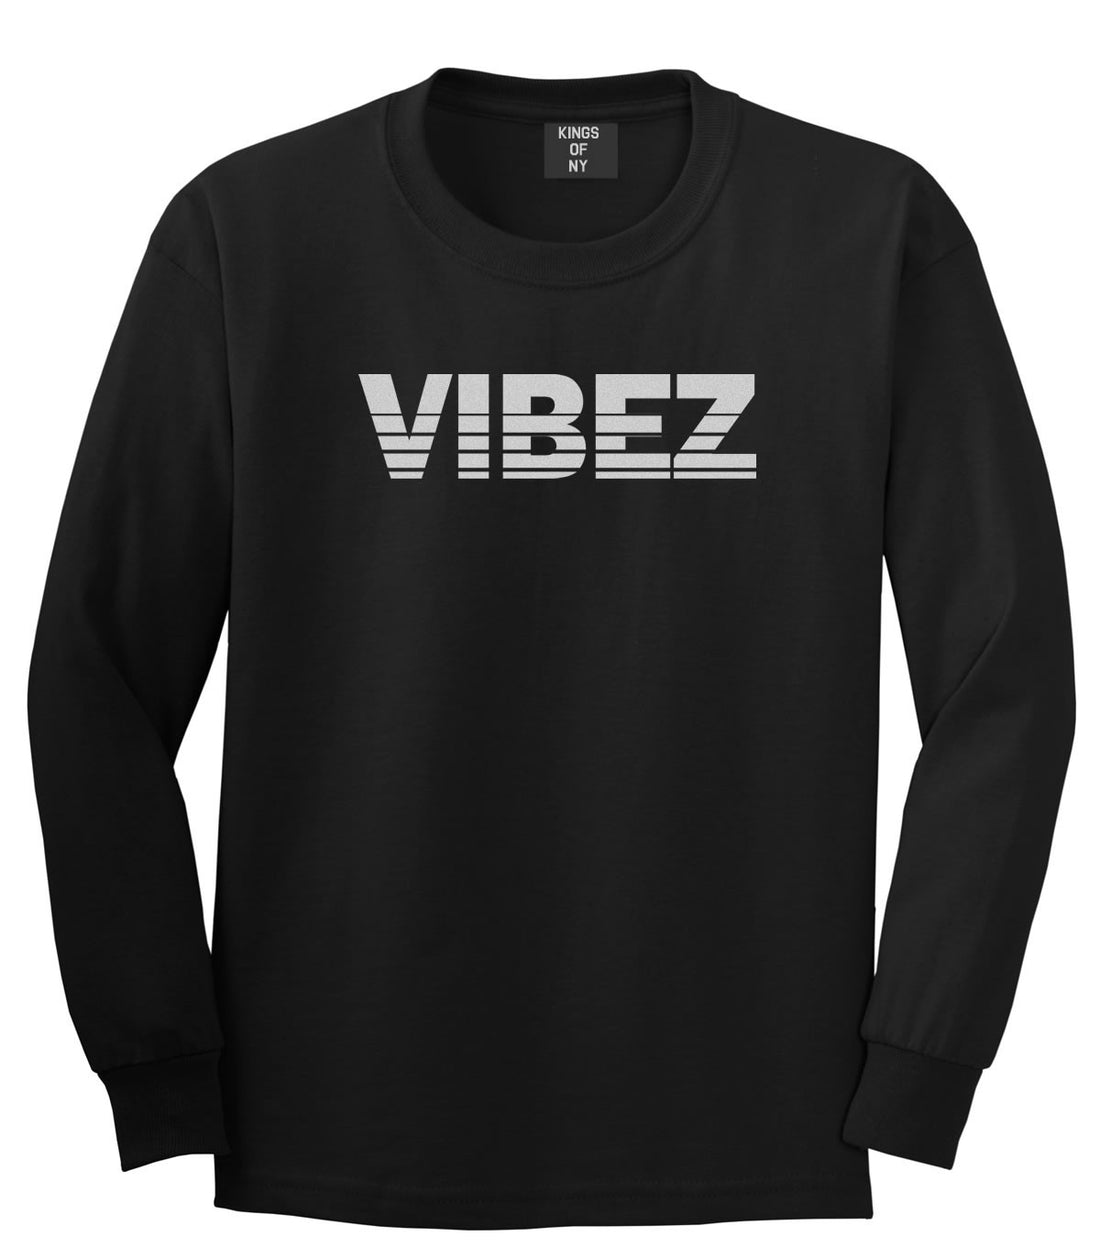 VIBEZ Racing Style Boys Kids Long Sleeve T-Shirt in Black by Kings Of NY